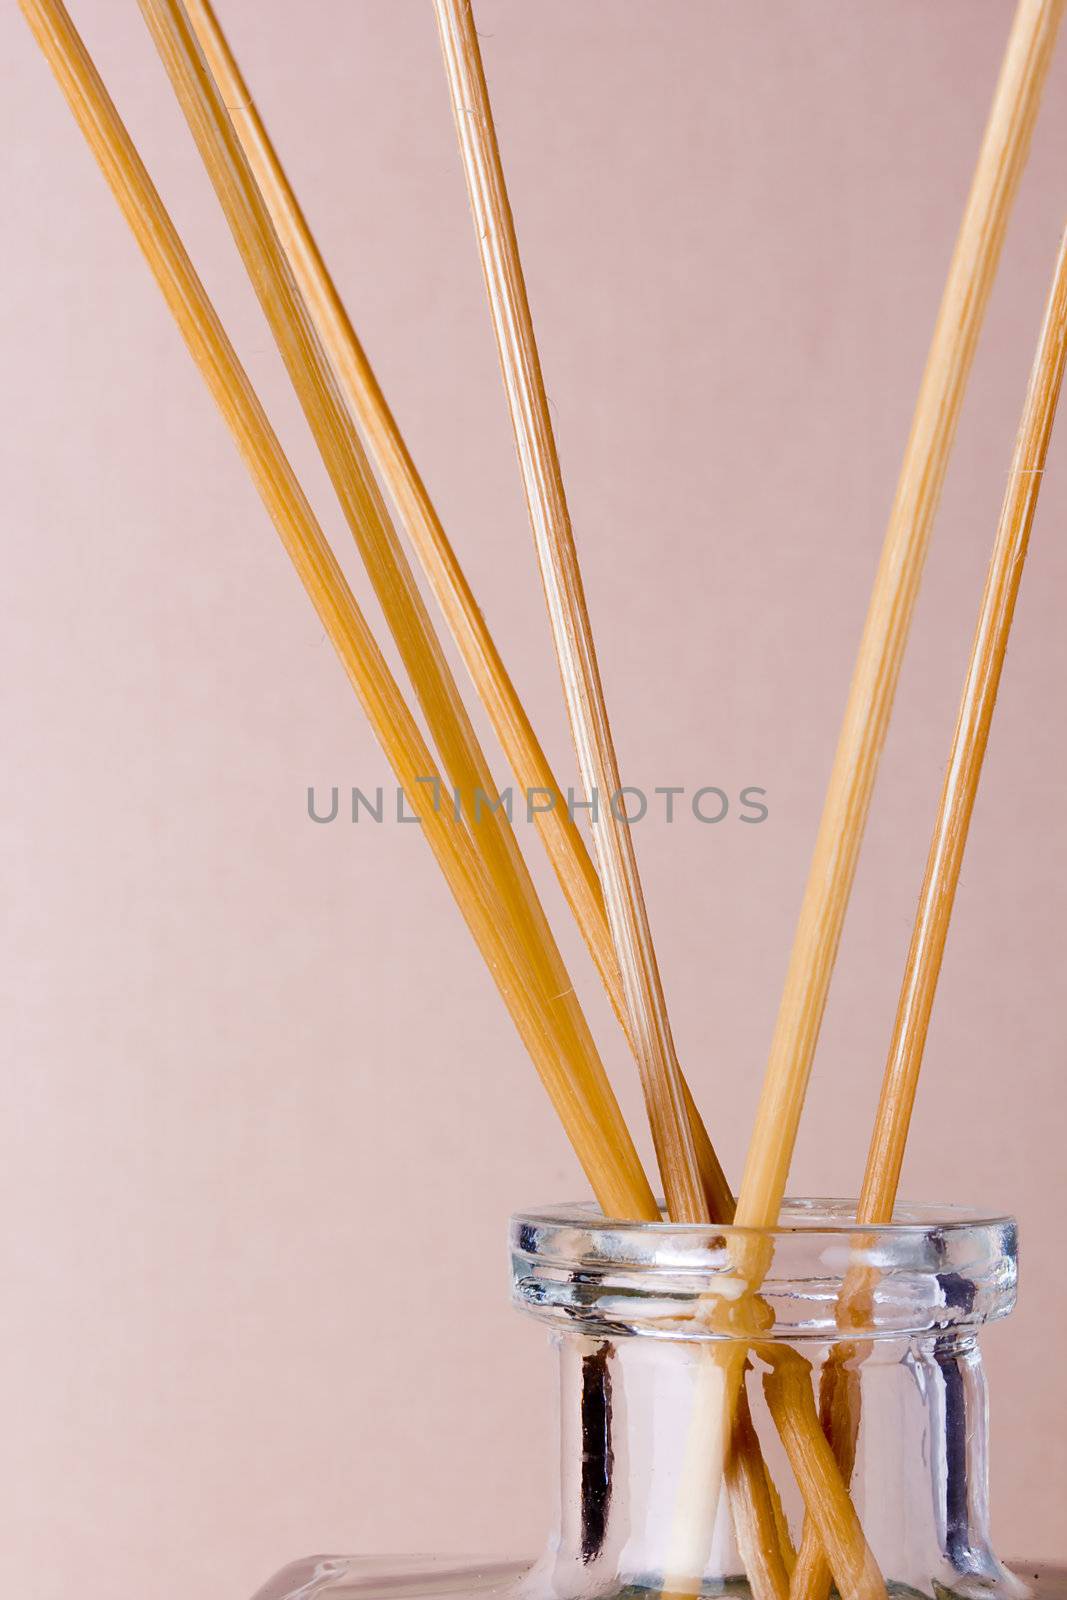 Incense Sticks in a bottle with flavor.